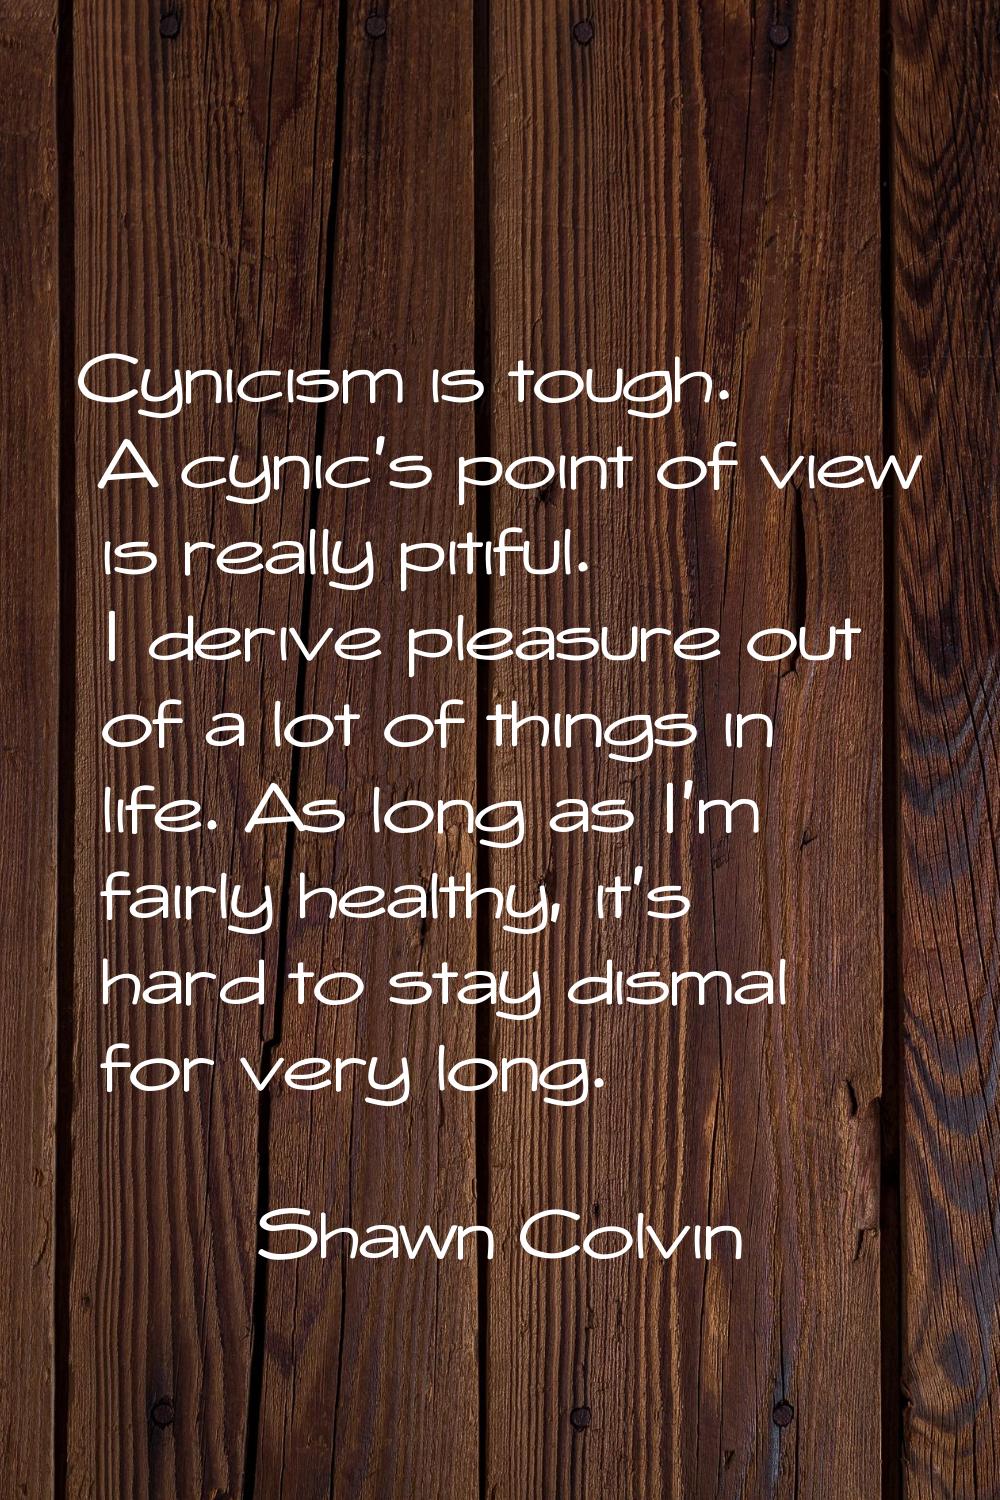 Cynicism is tough. A cynic's point of view is really pitiful. I derive pleasure out of a lot of thi